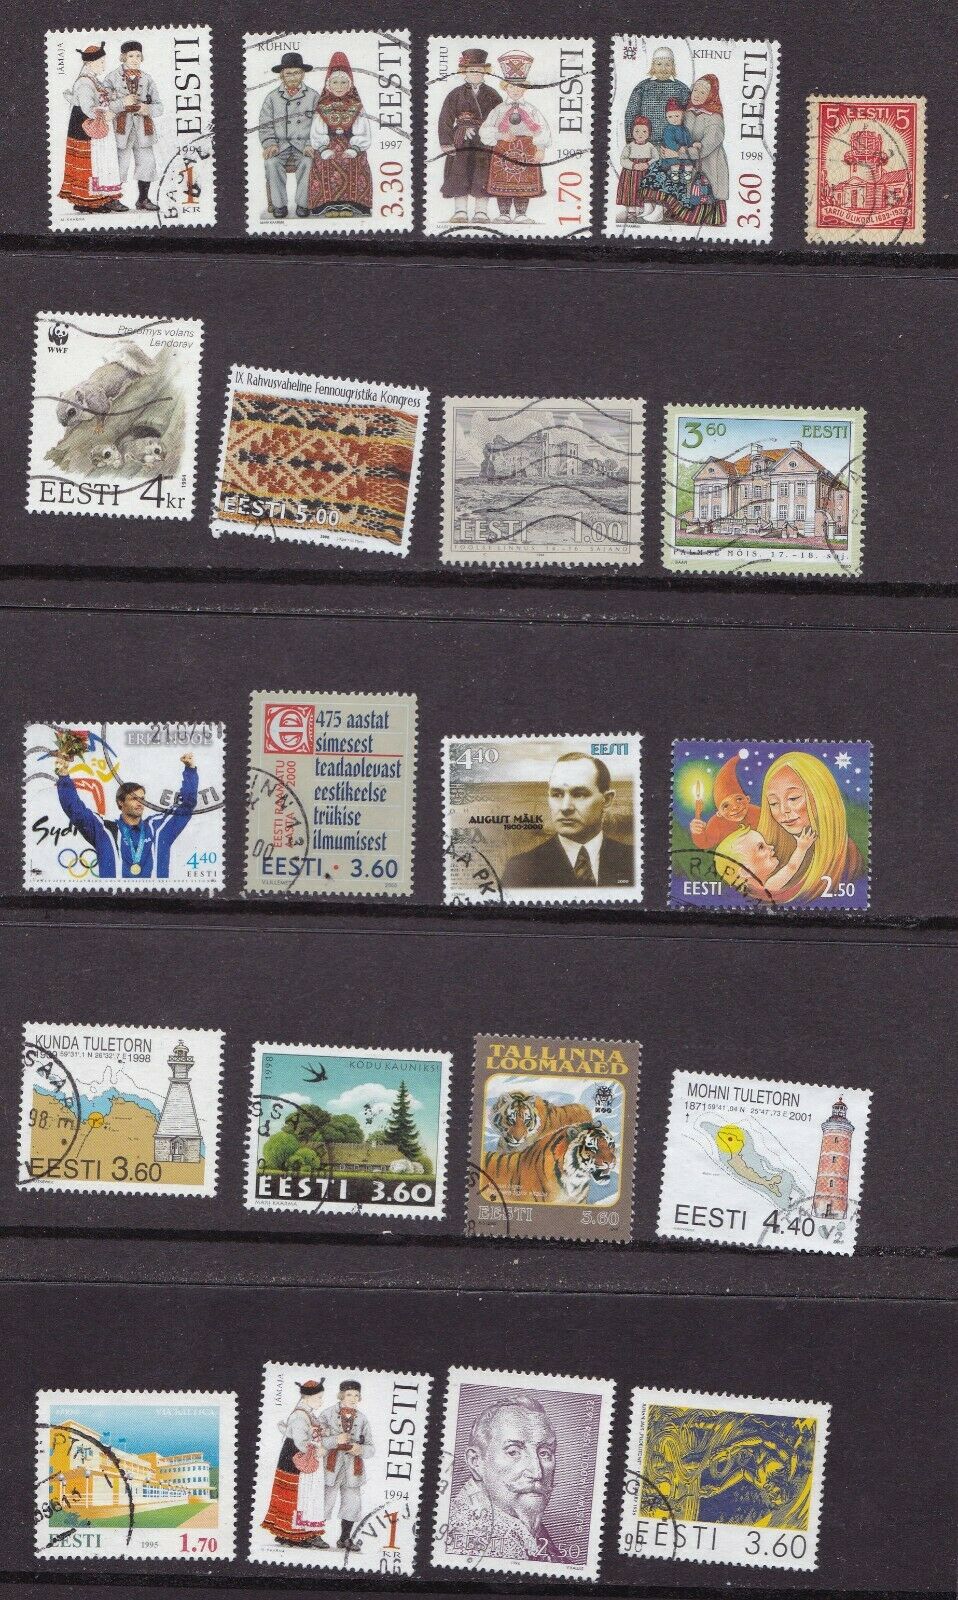 Nice Lot Of Estonia Used Stamps Mostly From 1990s In 3 Pics